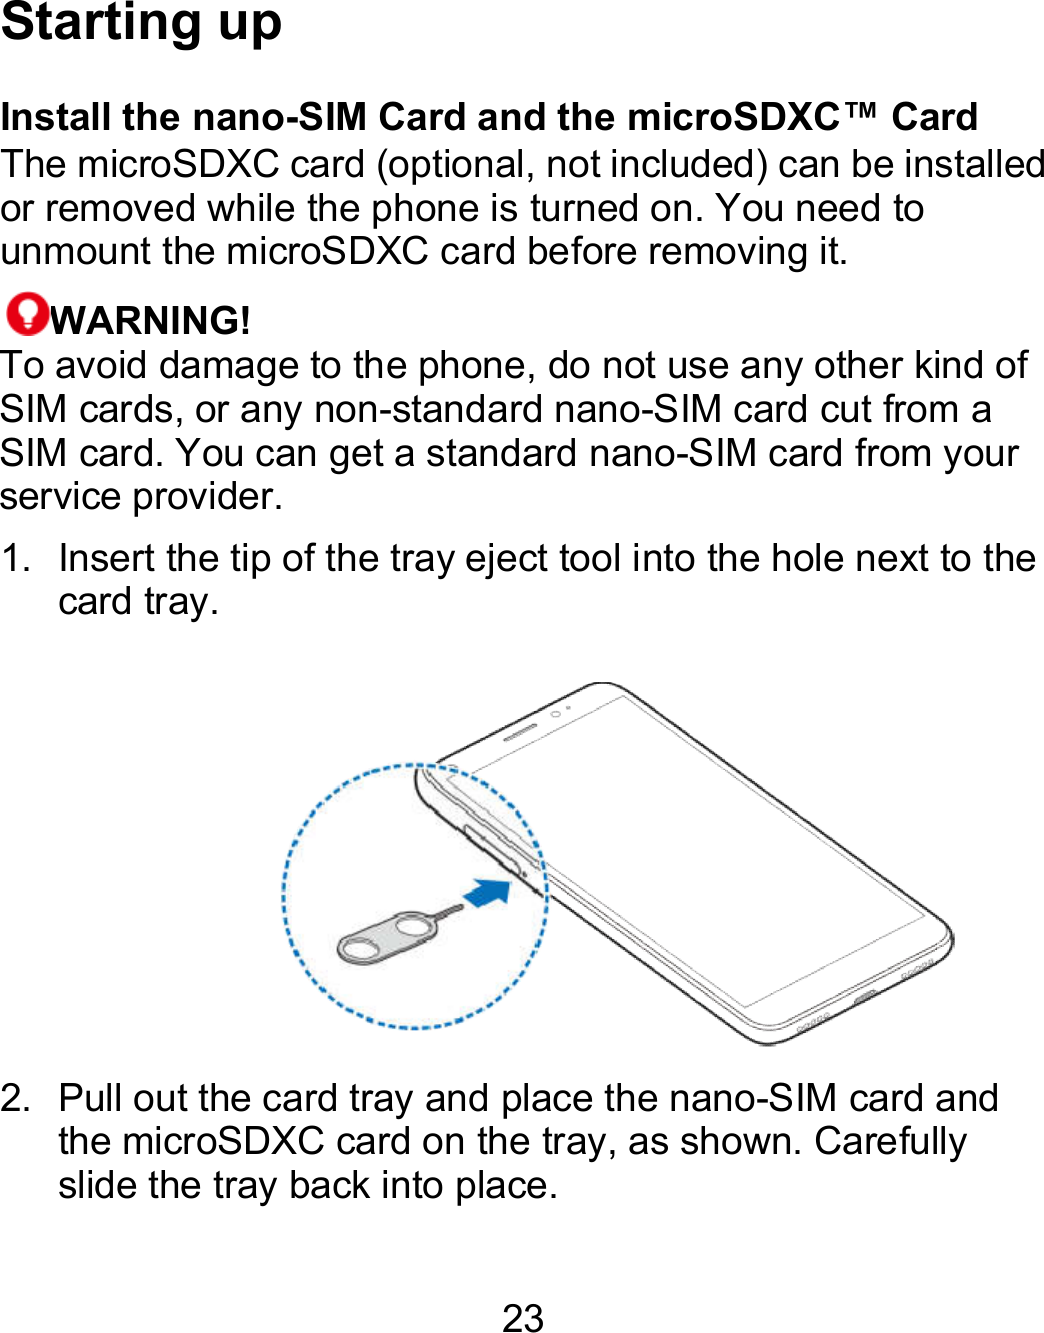 23 Starting up Install the nano-SIM Card and the microSDXC™ CardThe microSDXC card (optional, not included) can be installed or removed while the phone is turned on. You need to unmount the microSDXC card before removing it. WARNING! To avoid damage to the phone, do not use any other kind of SIM cards, or any non-standard nano-SIM card cut from a SIM card. You can get a standard nano-SIM card from your service provider. 1. Insert the tip of the tray eject tool into the hole next to the card tray. 2.  Pull out the card tray and place the nano-SIM card and the microSDXC card on the tray, as shown. Carefully slide the tray back into place. Card The microSDXC card (optional, not included) can be installed or removed while the phone is turned on. You need to To avoid damage to the phone, do not use any other kind of SIM card cut from a SIM card from your Insert the tip of the tray eject tool into the hole next to the  rd and the microSDXC card on the tray, as shown. Carefully 